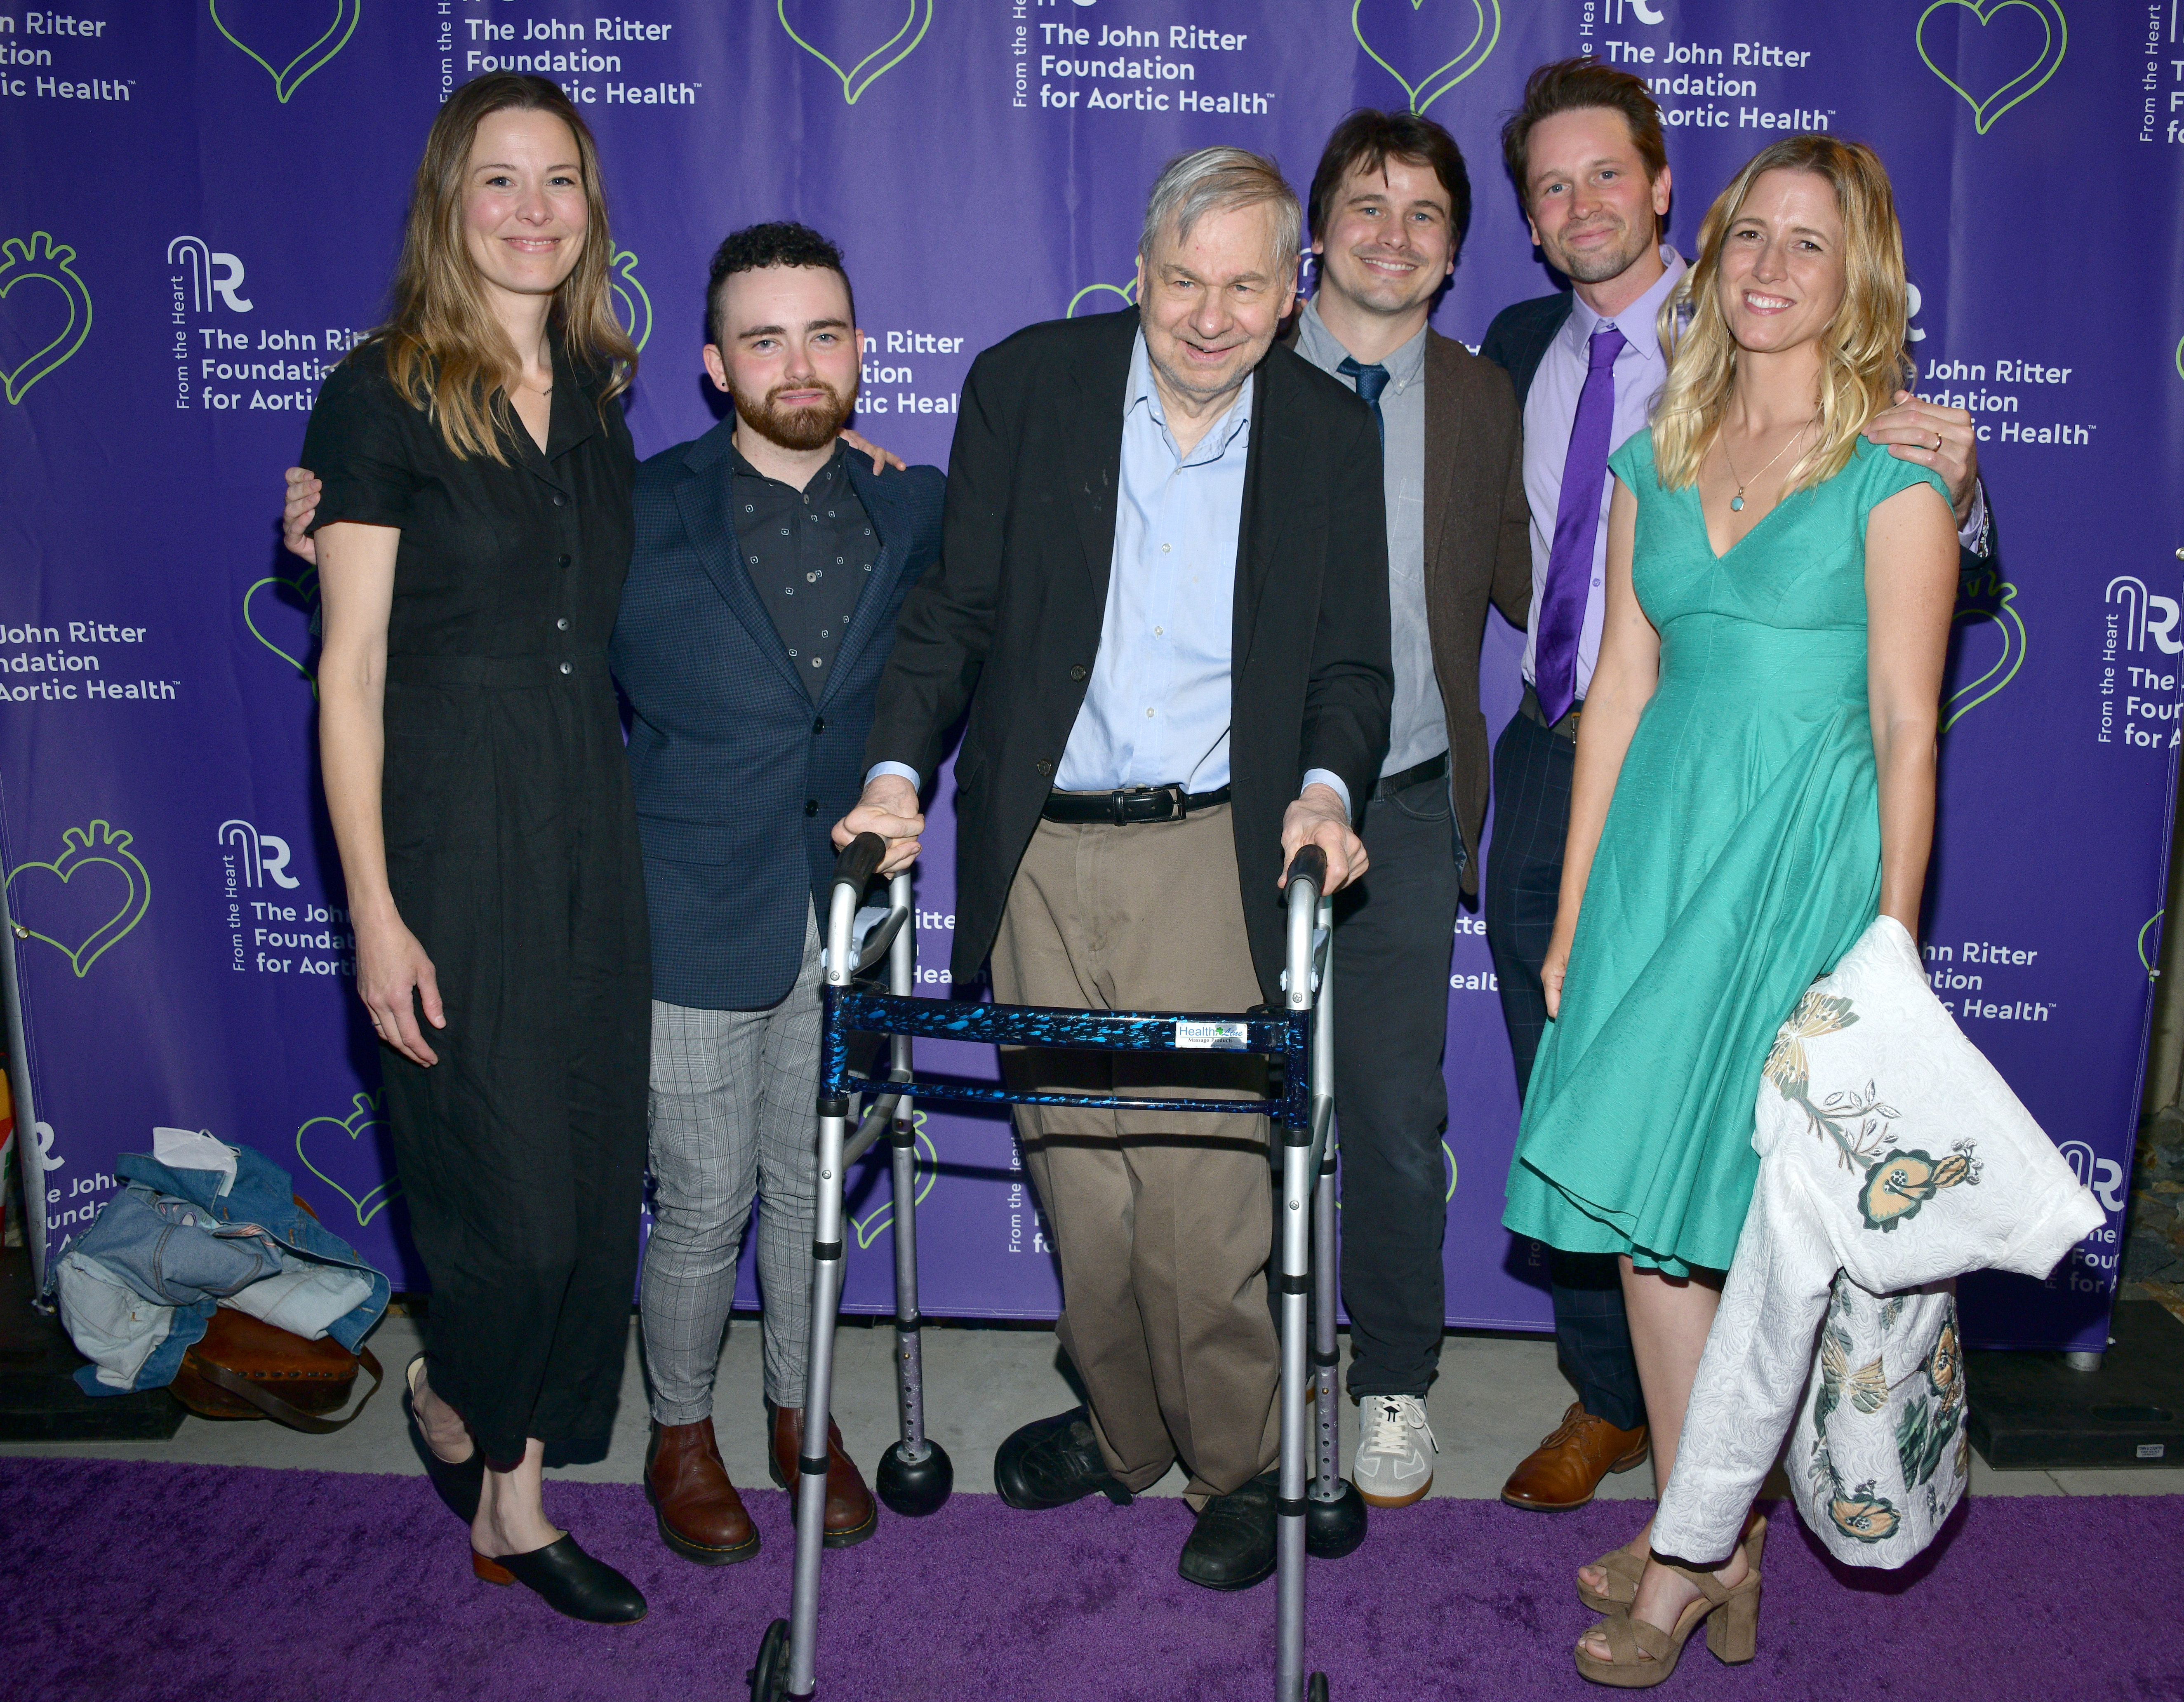 Members of the Ritter family pose with Jason Ritter, Tyler Ritter and Leila Parma as the John Ritter Foundation for Aortic Health hosts an Evening from the Heart LA 2022 Gala at Valley Relics Museum, on May 5, 2022, in Van Nuys, California. | Source: Getty Images